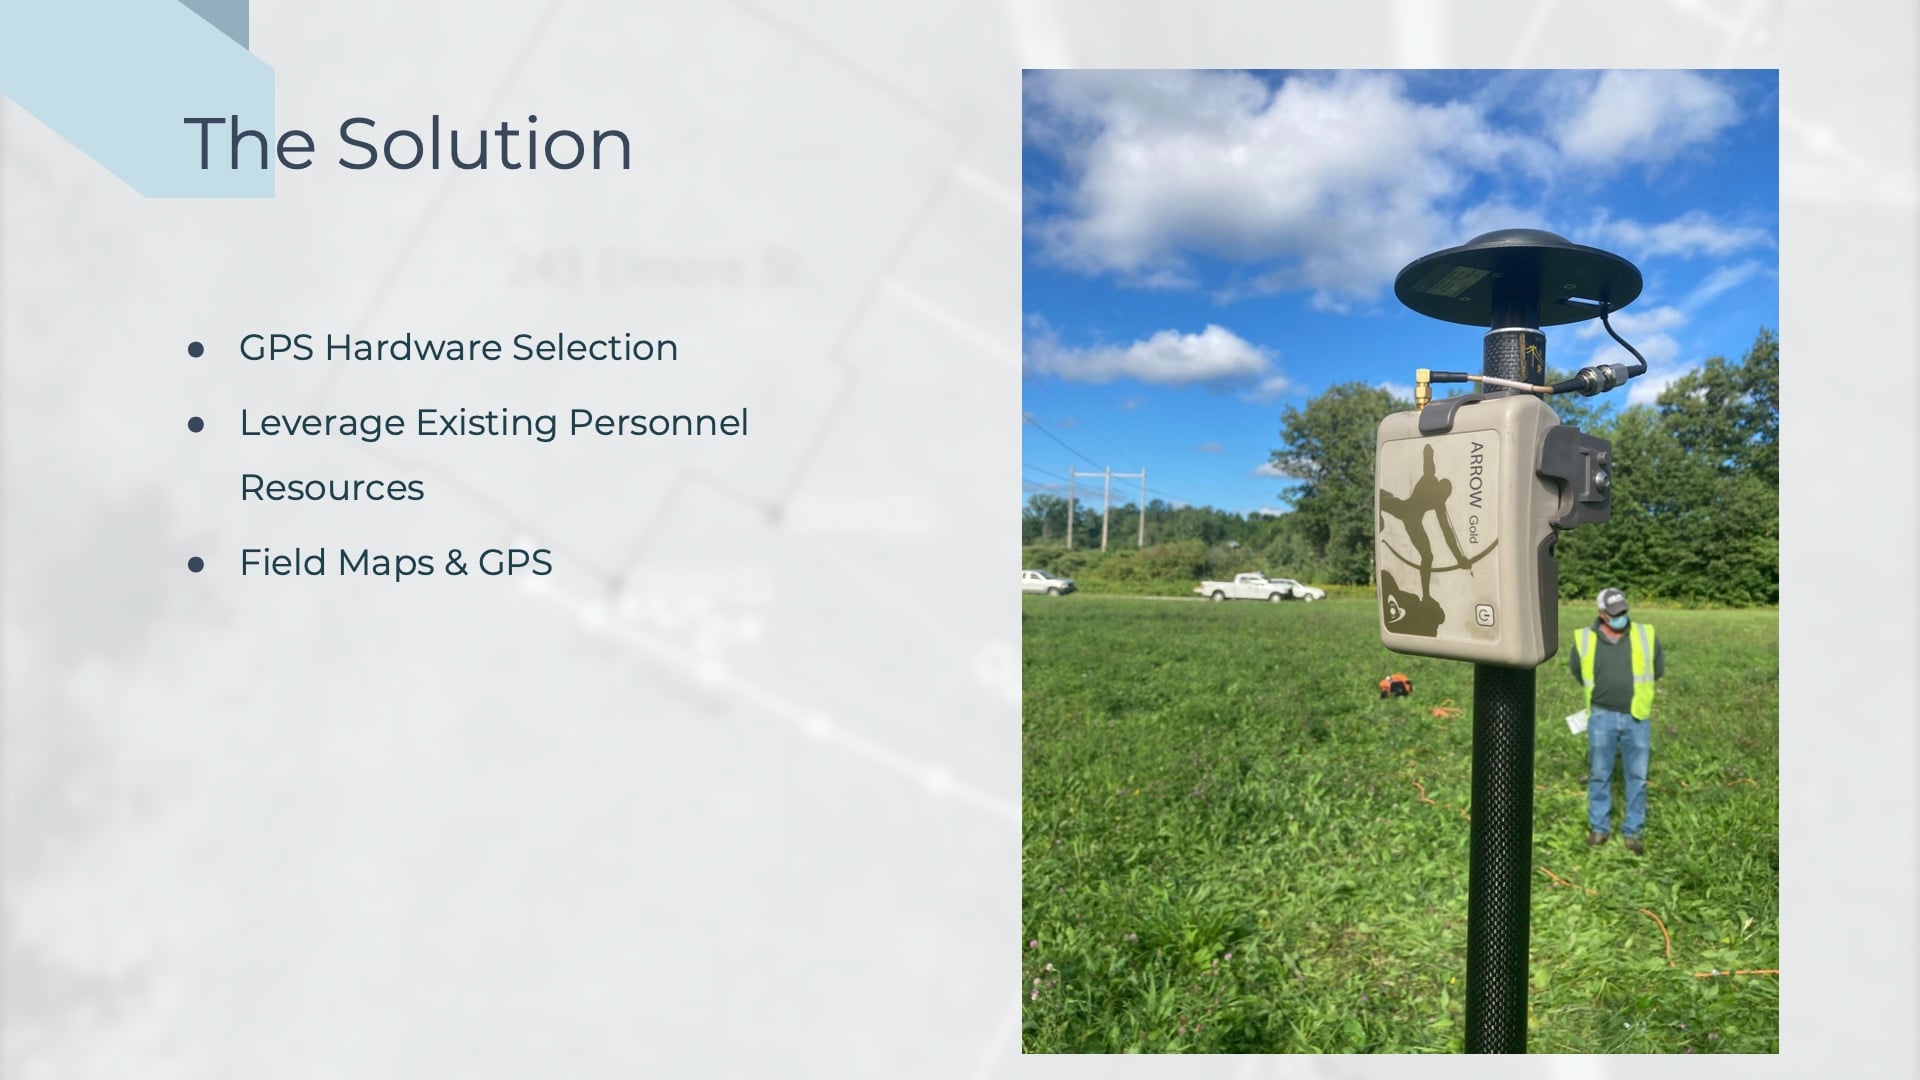 "The Solution" slides continue. Vermont Gas Systems leveraged existing personnel with new geospatial hardware and software. After piloting many mapping technologies, they chose GIS software from Esri and GPS hardware from Eos Positioning Systems. The slide shows an image of the GPS receiver on the slide.